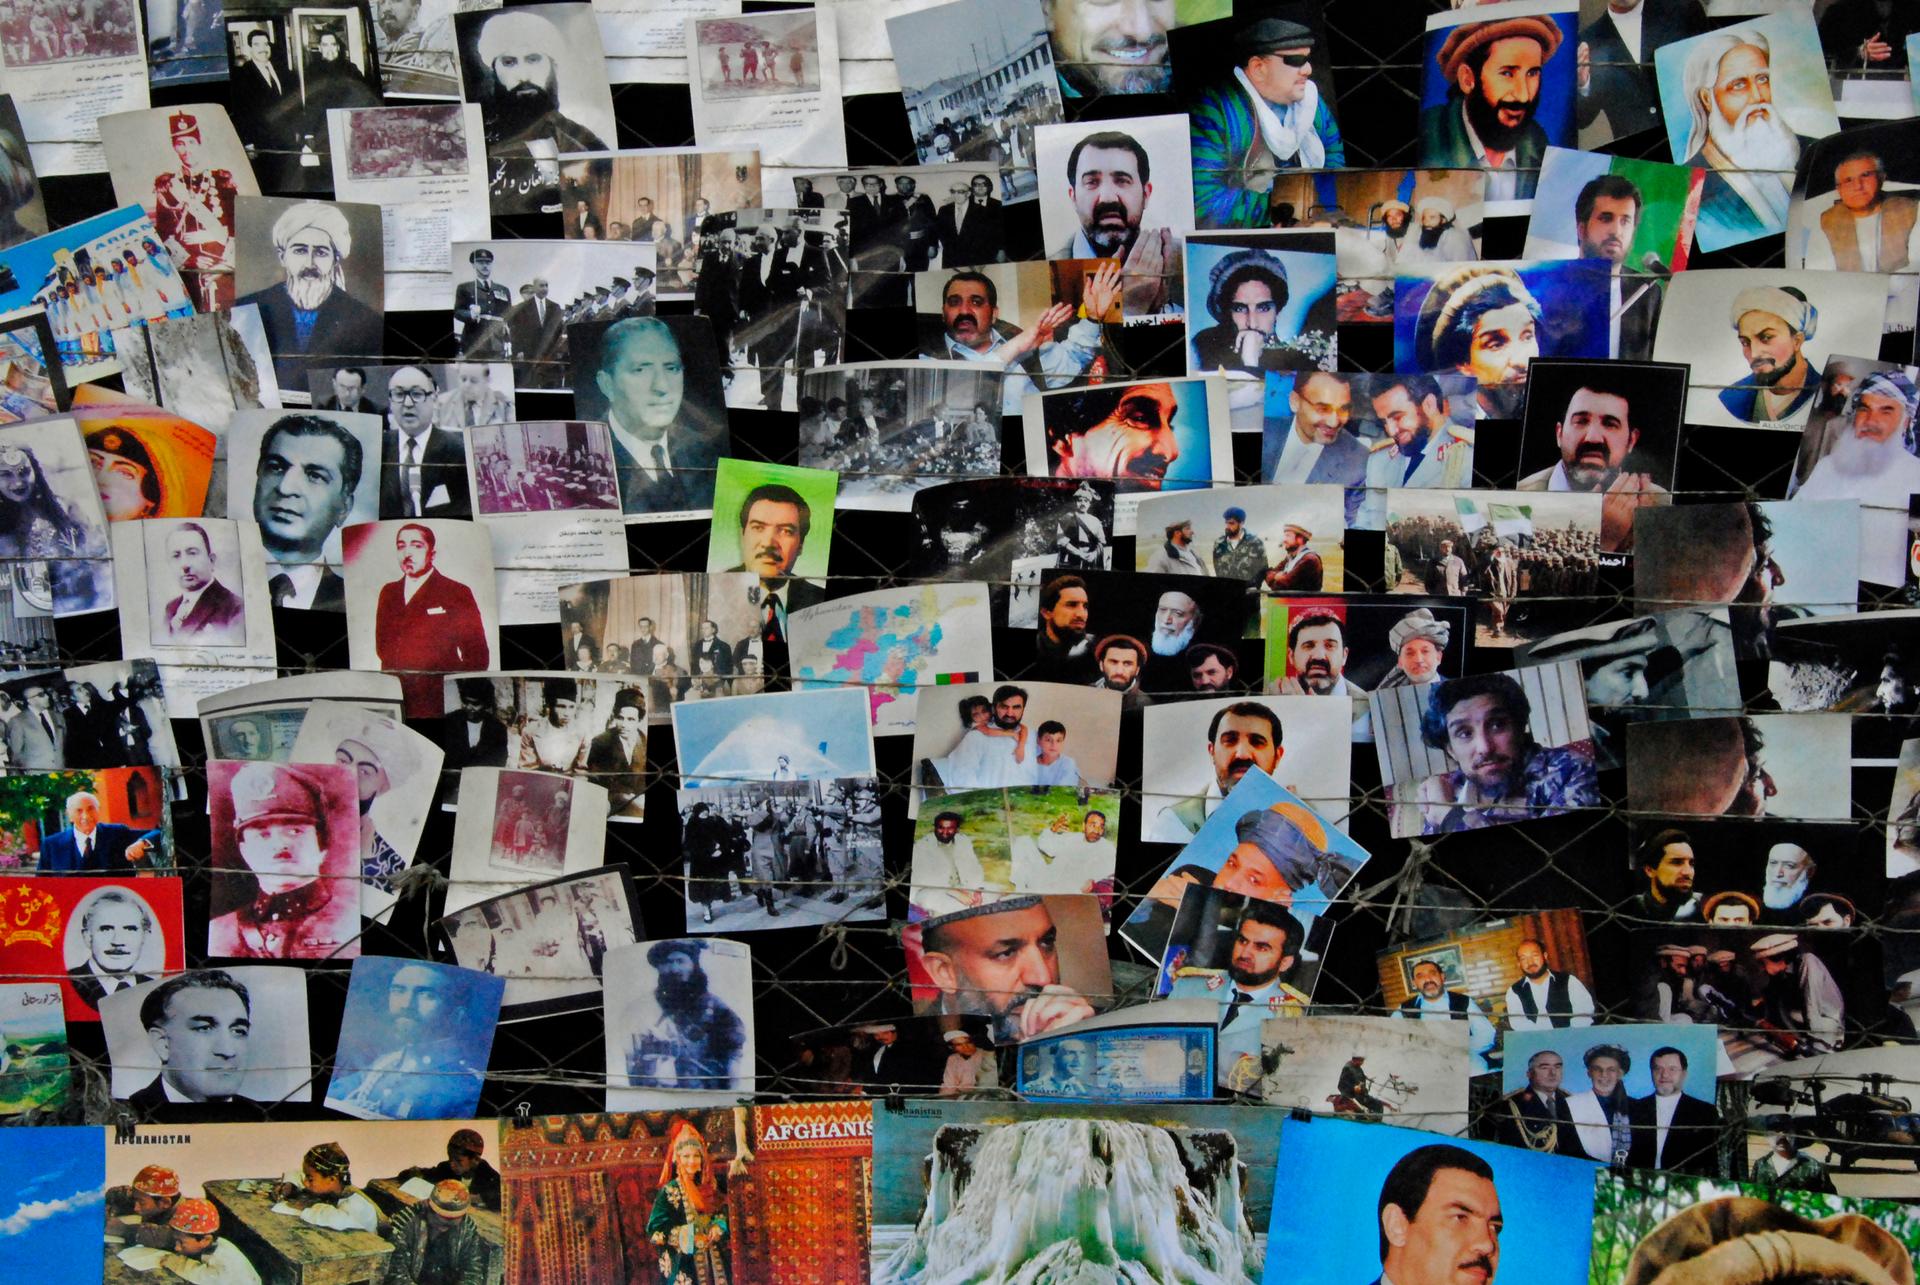 A postcard seller displays images of famous Afghans in Kabul.